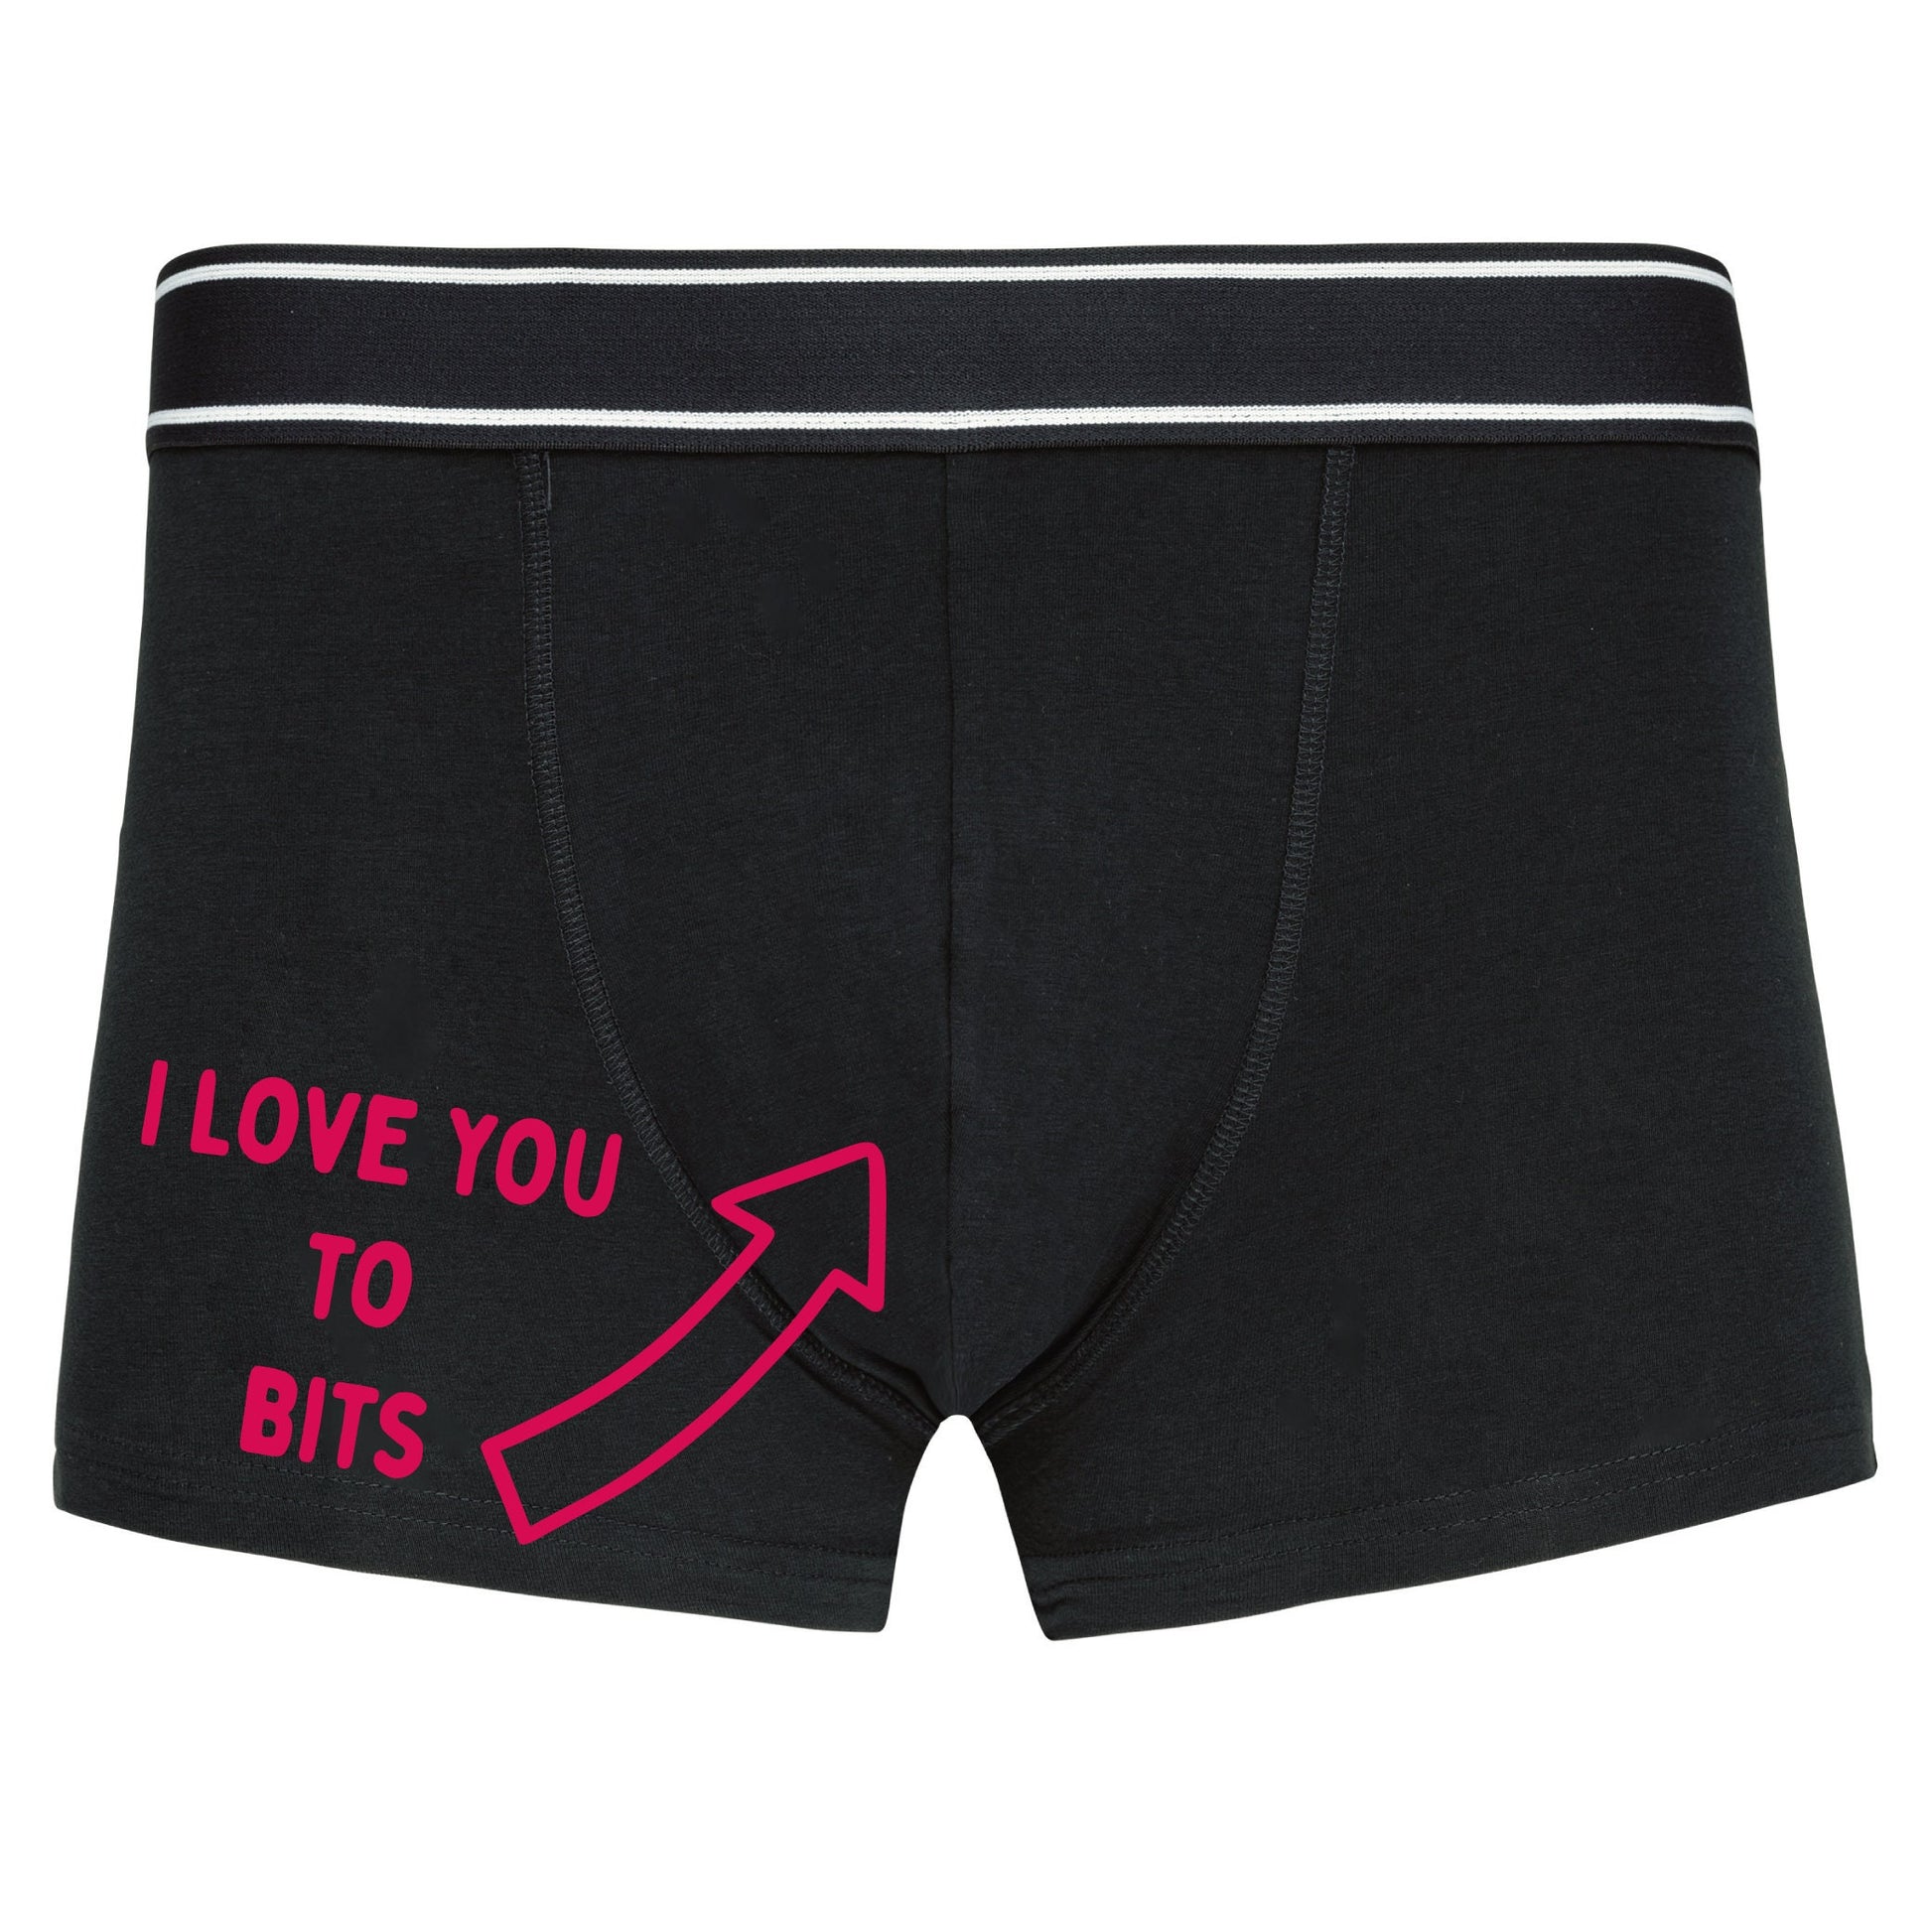 Boxer shorts -I Love you to bits - Valentines Gift For Him - Innuendo